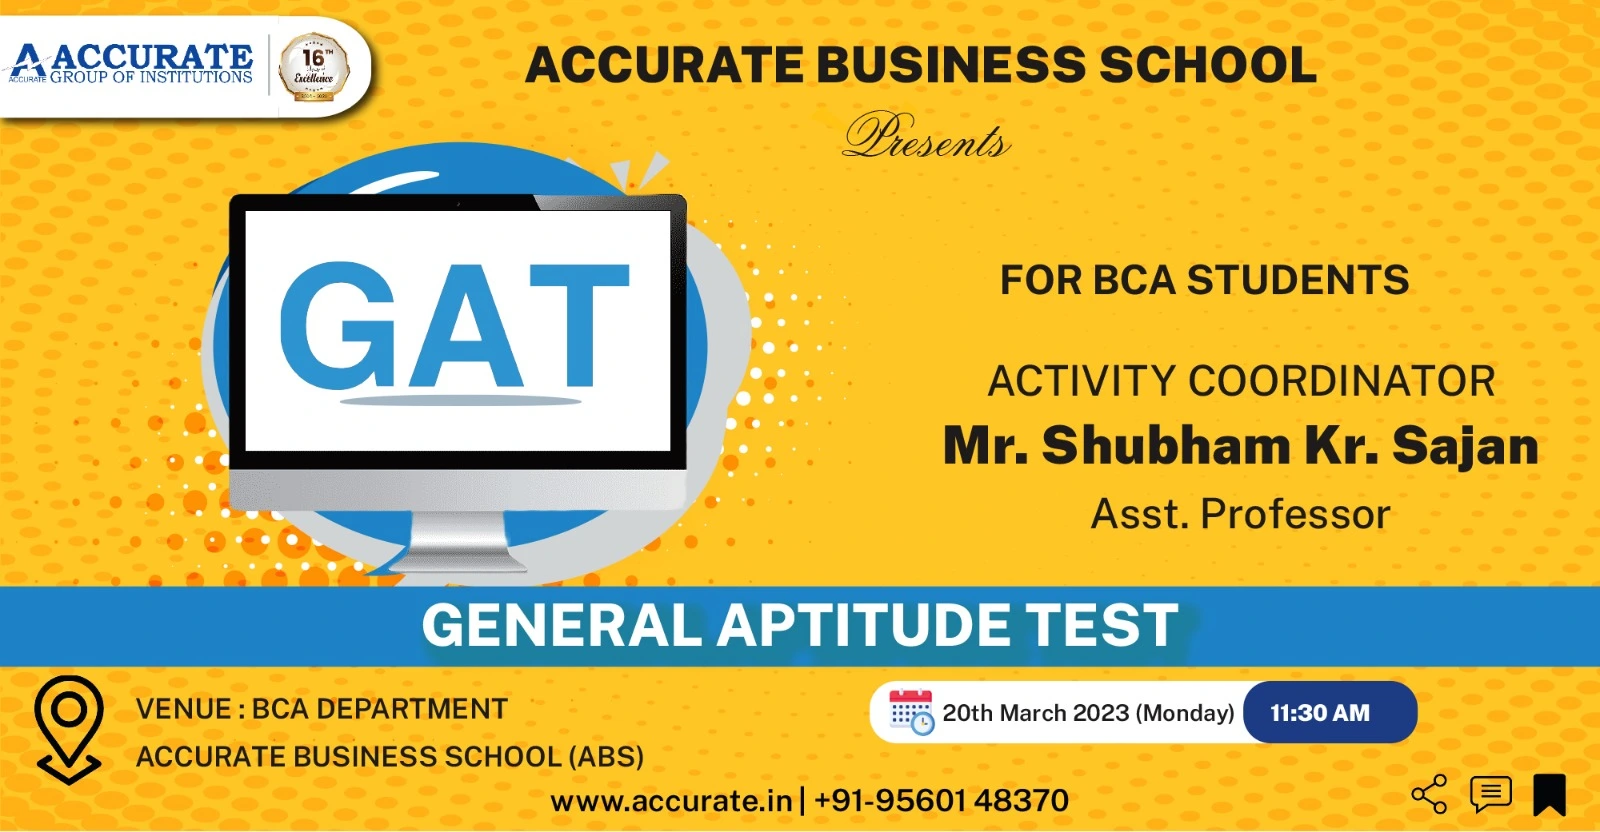 General Aptitutd Test for BCA Students on March 20, 2023